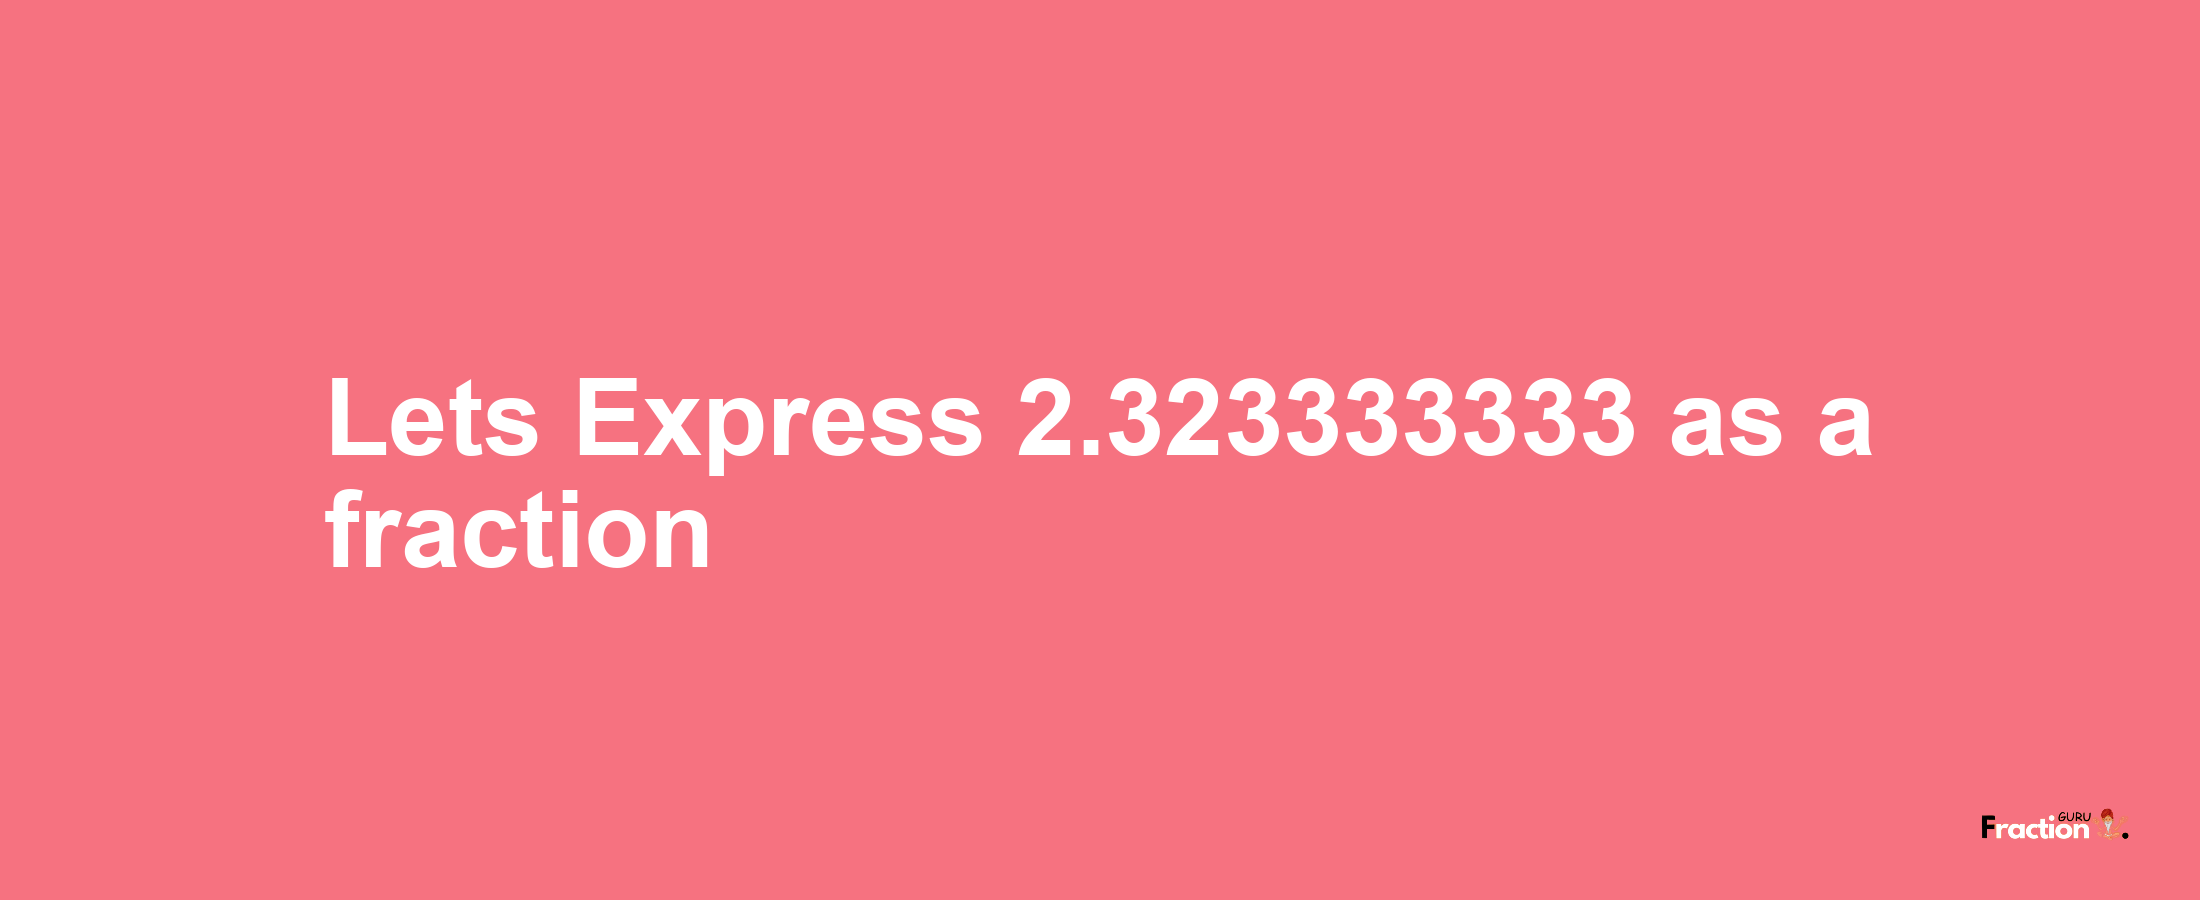 Lets Express 2.323333333 as afraction